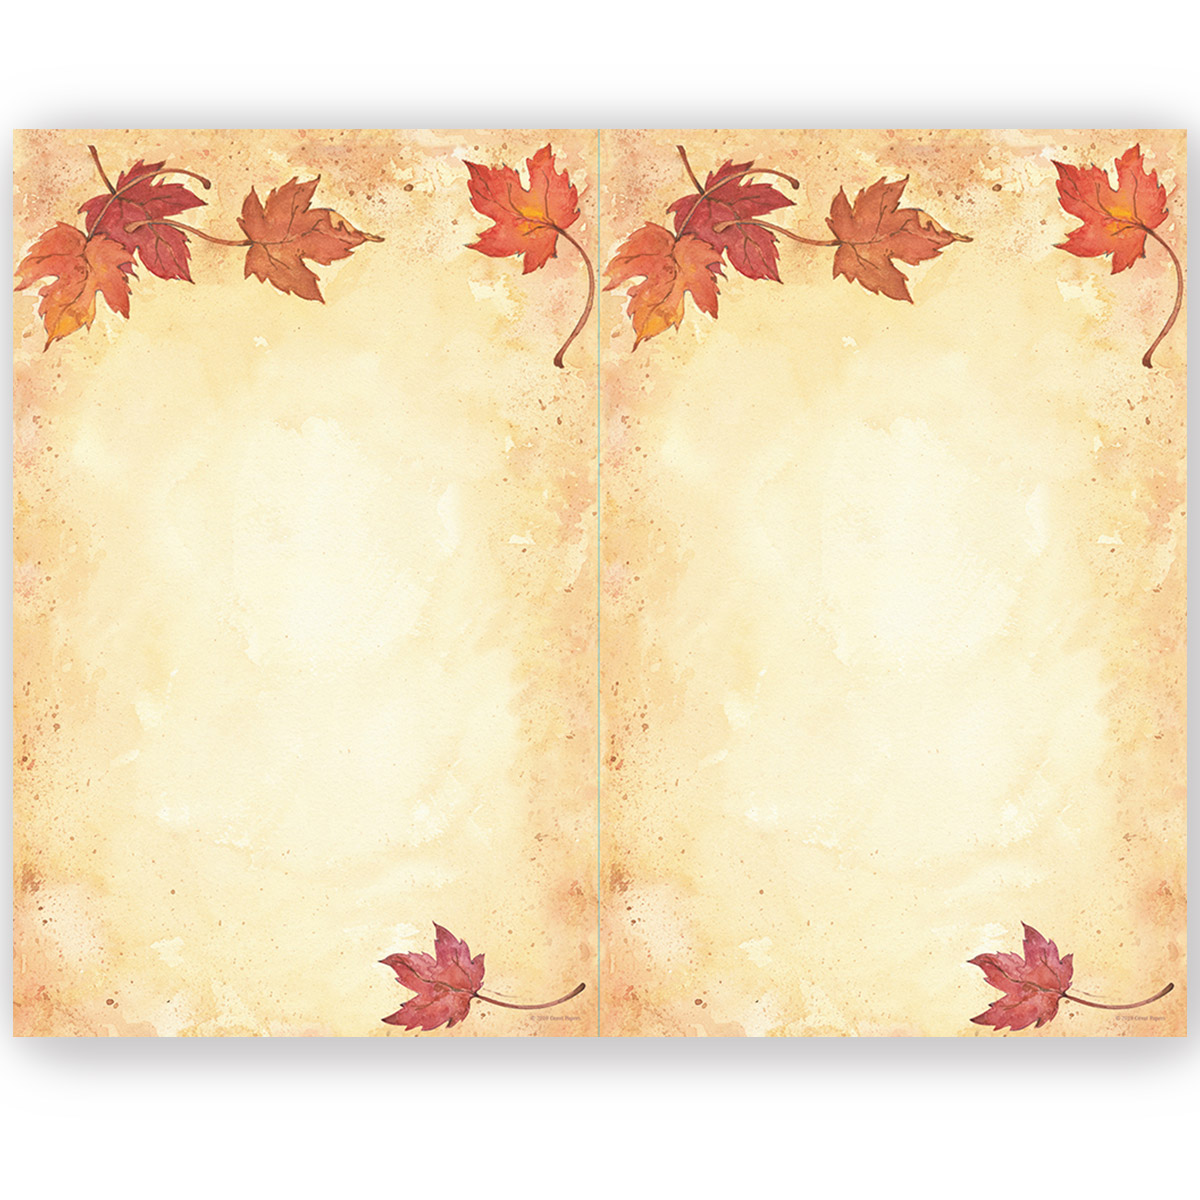 Fall Leaves Invitations - 50 Count